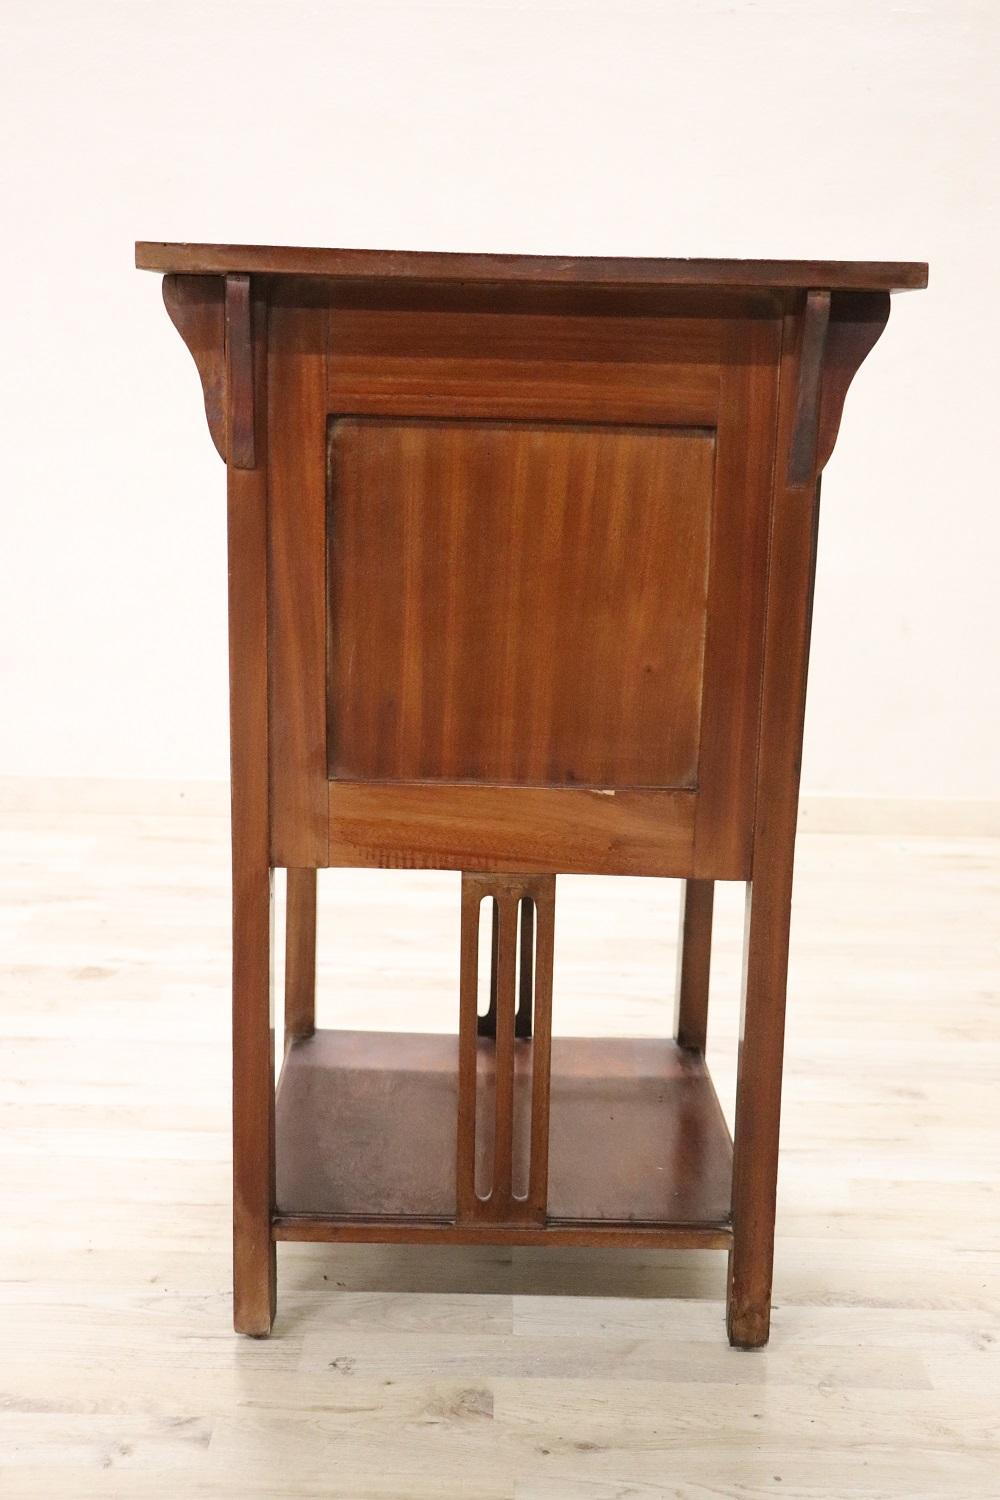 Italian Early 20th Century Art Nouveau Inlaid Wood Side Table For Sale